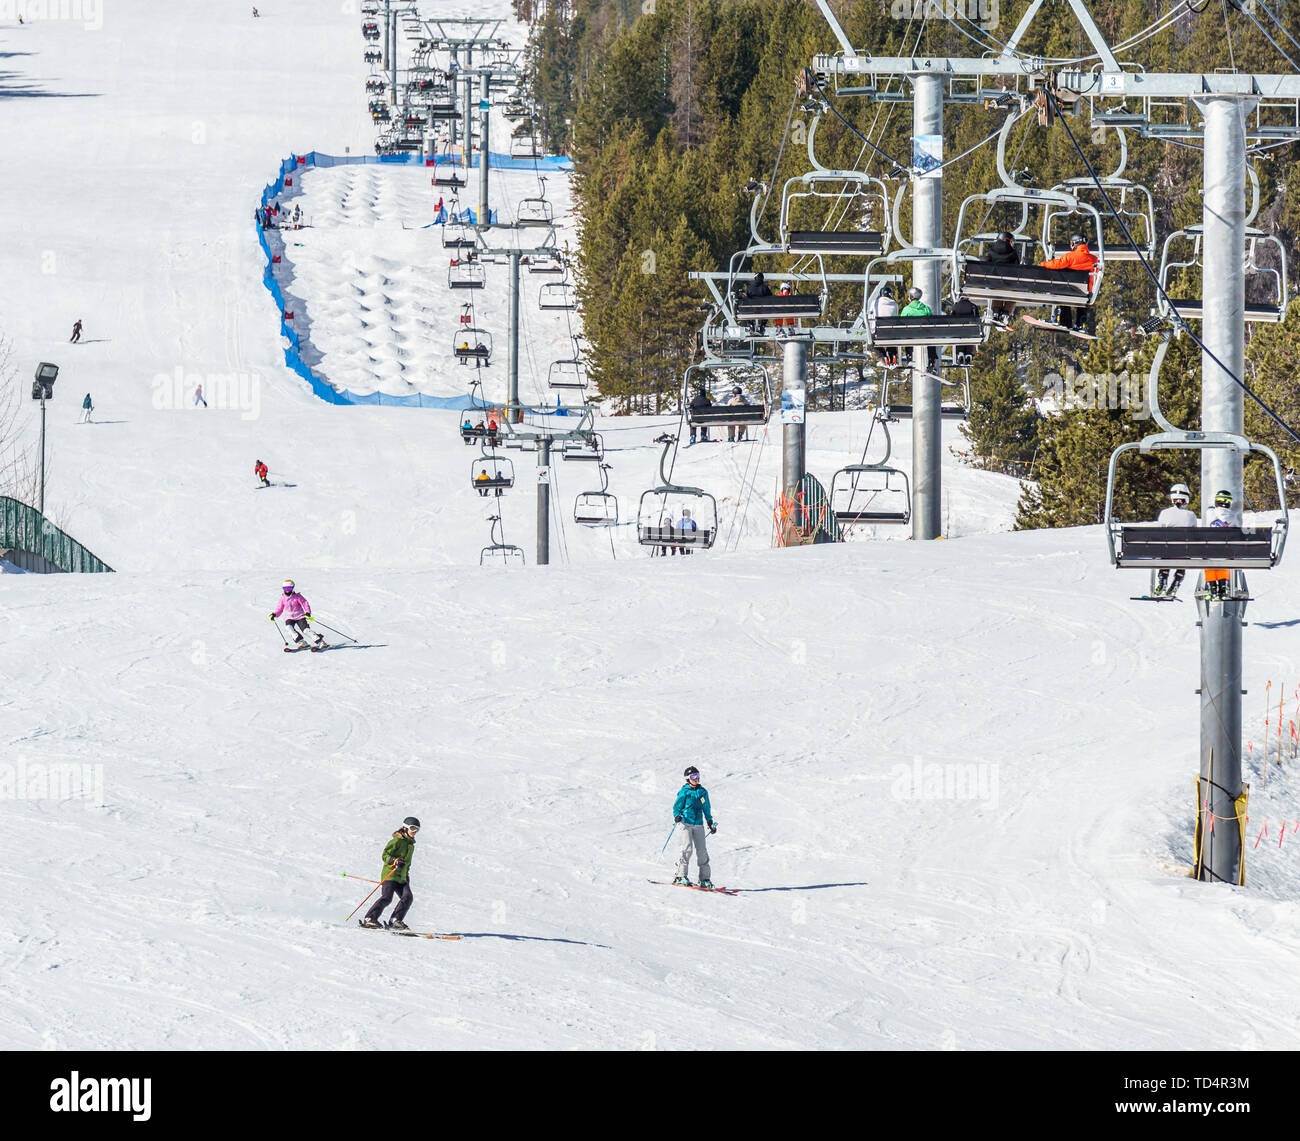 KIMBERLEY, CANADA - MARCH 22, 2019: Mountain Resort view early spring people skiing. Stock Photo